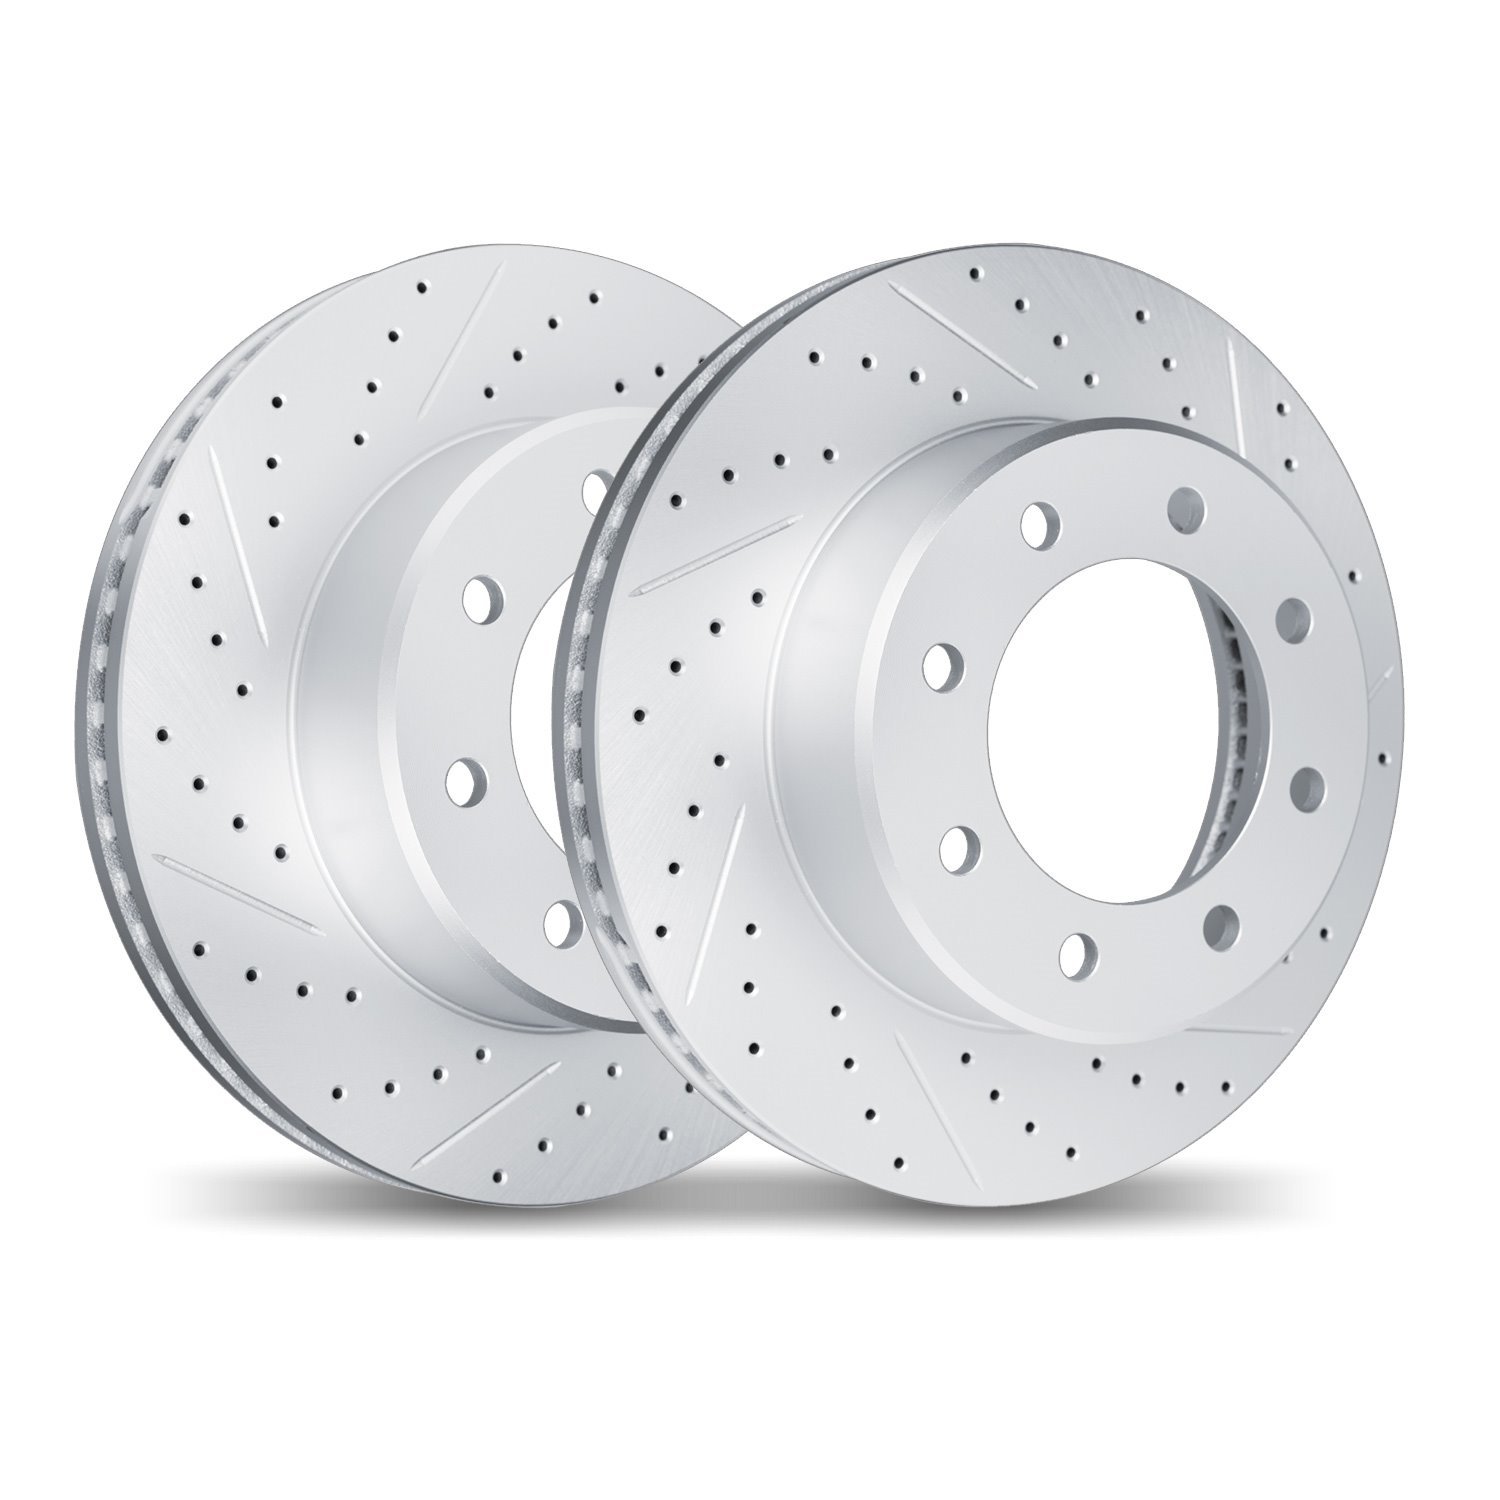 2002-54012 Geoperformance Drilled/Slotted Brake Rotors, 1995-2007 Ford/Lincoln/Mercury/Mazda, Position: Front